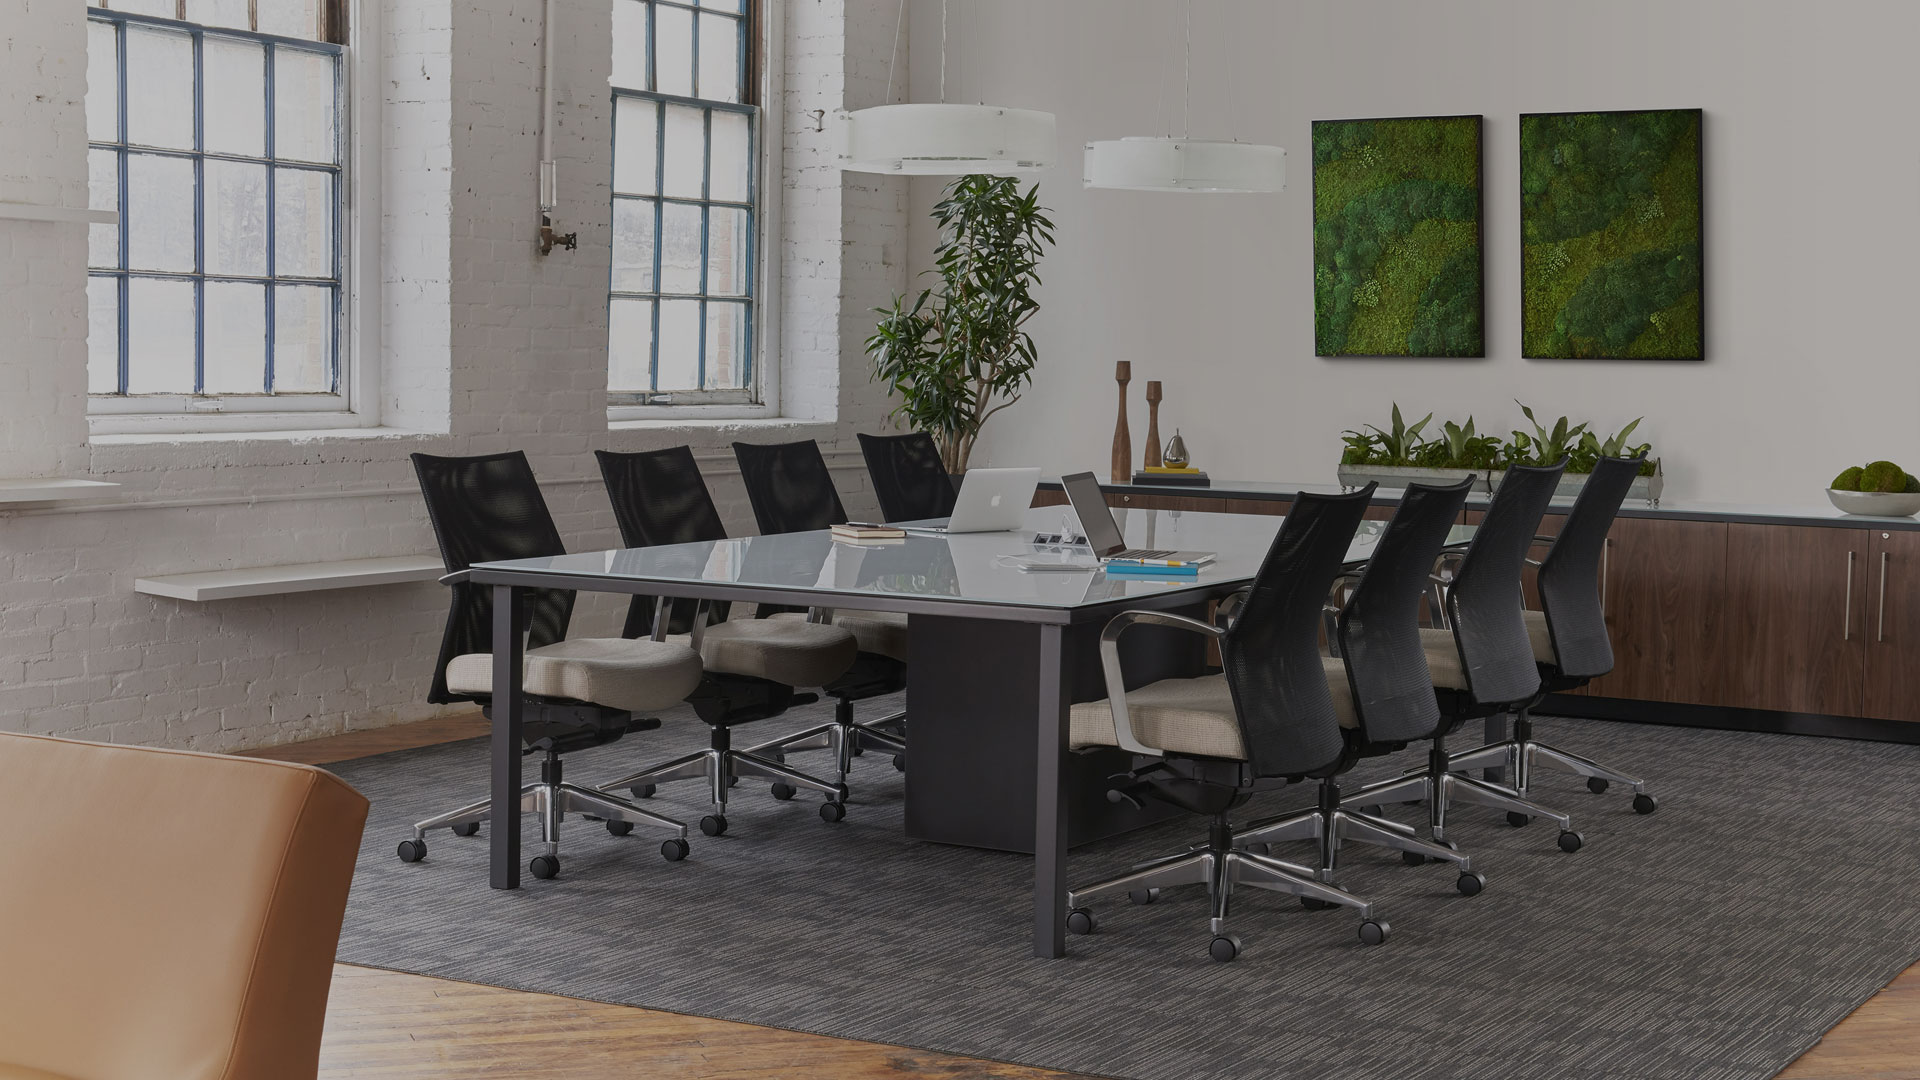 Trendway Intrinsic Conference Table with Sketch Seating